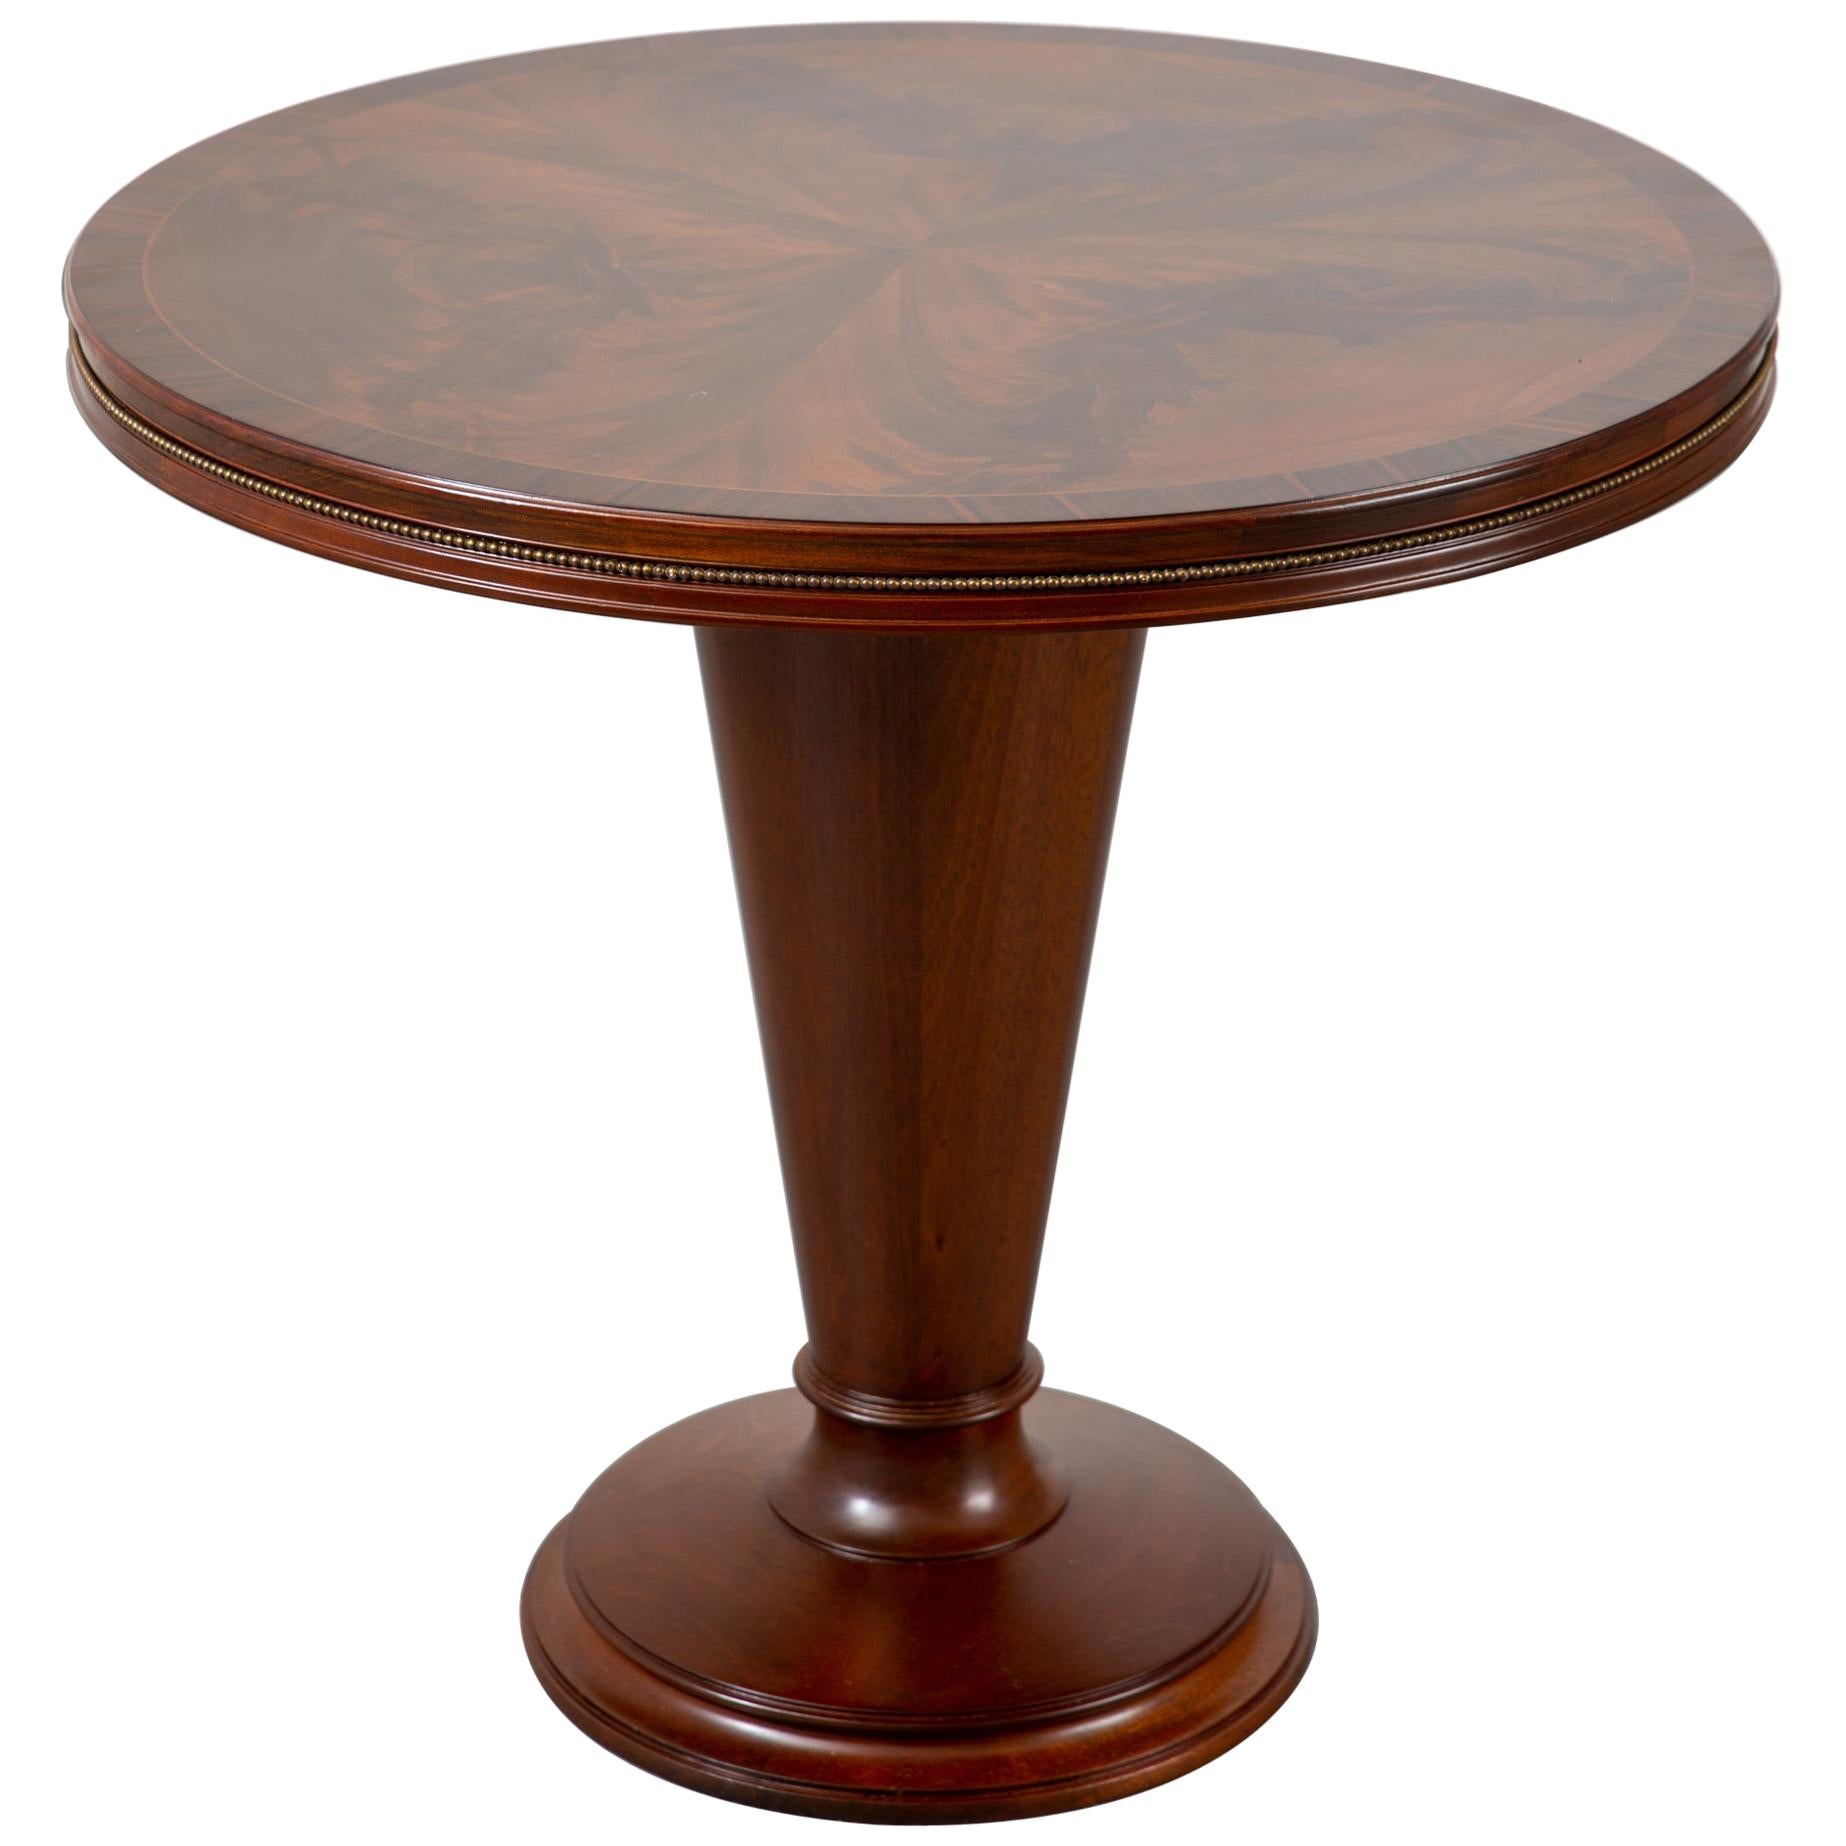 1940's Art Deco Round Center Table with Book Matched Flame Top